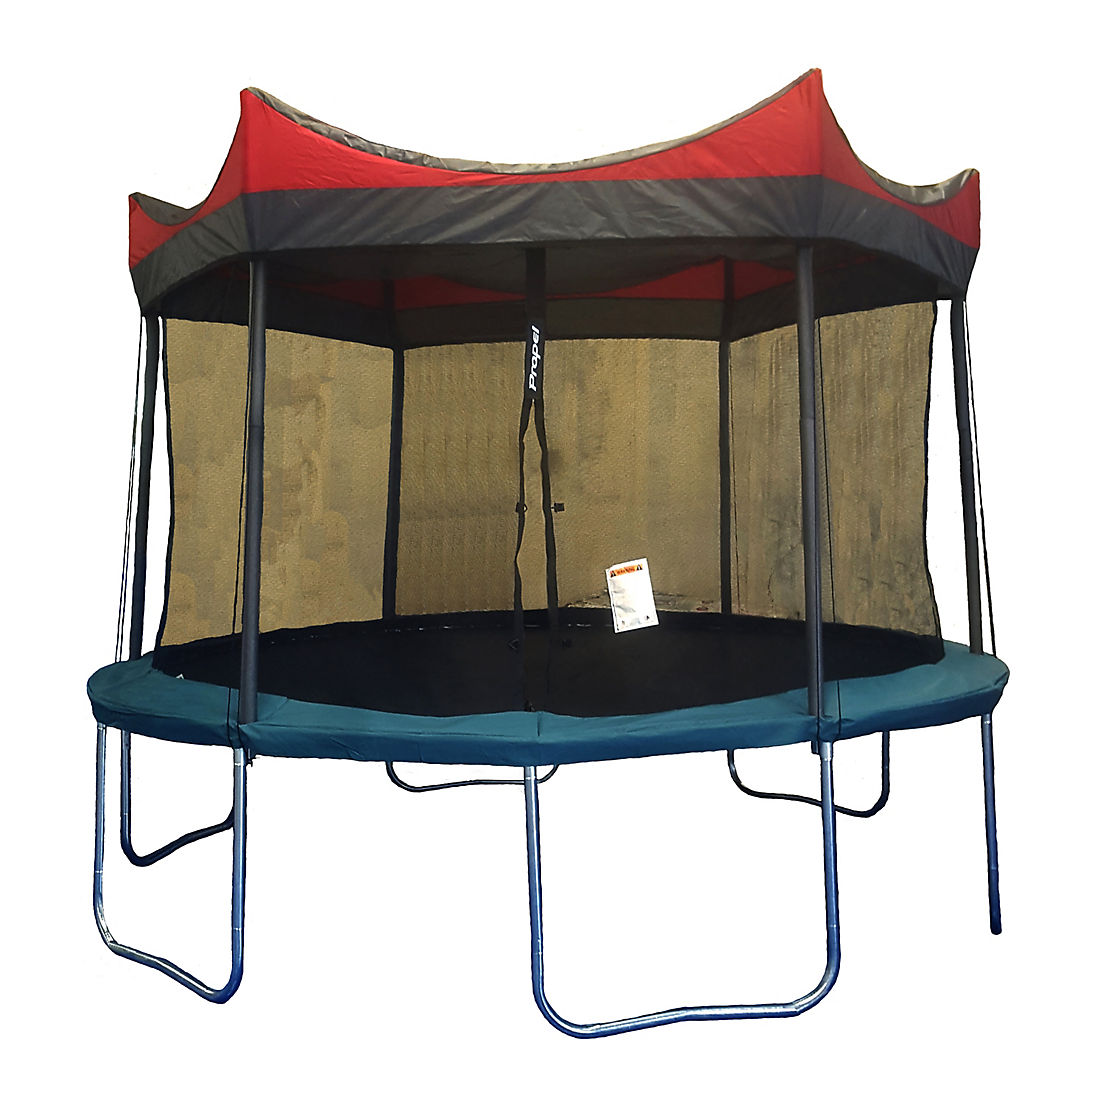 Trampoline Shade Cover - Wholesale Club